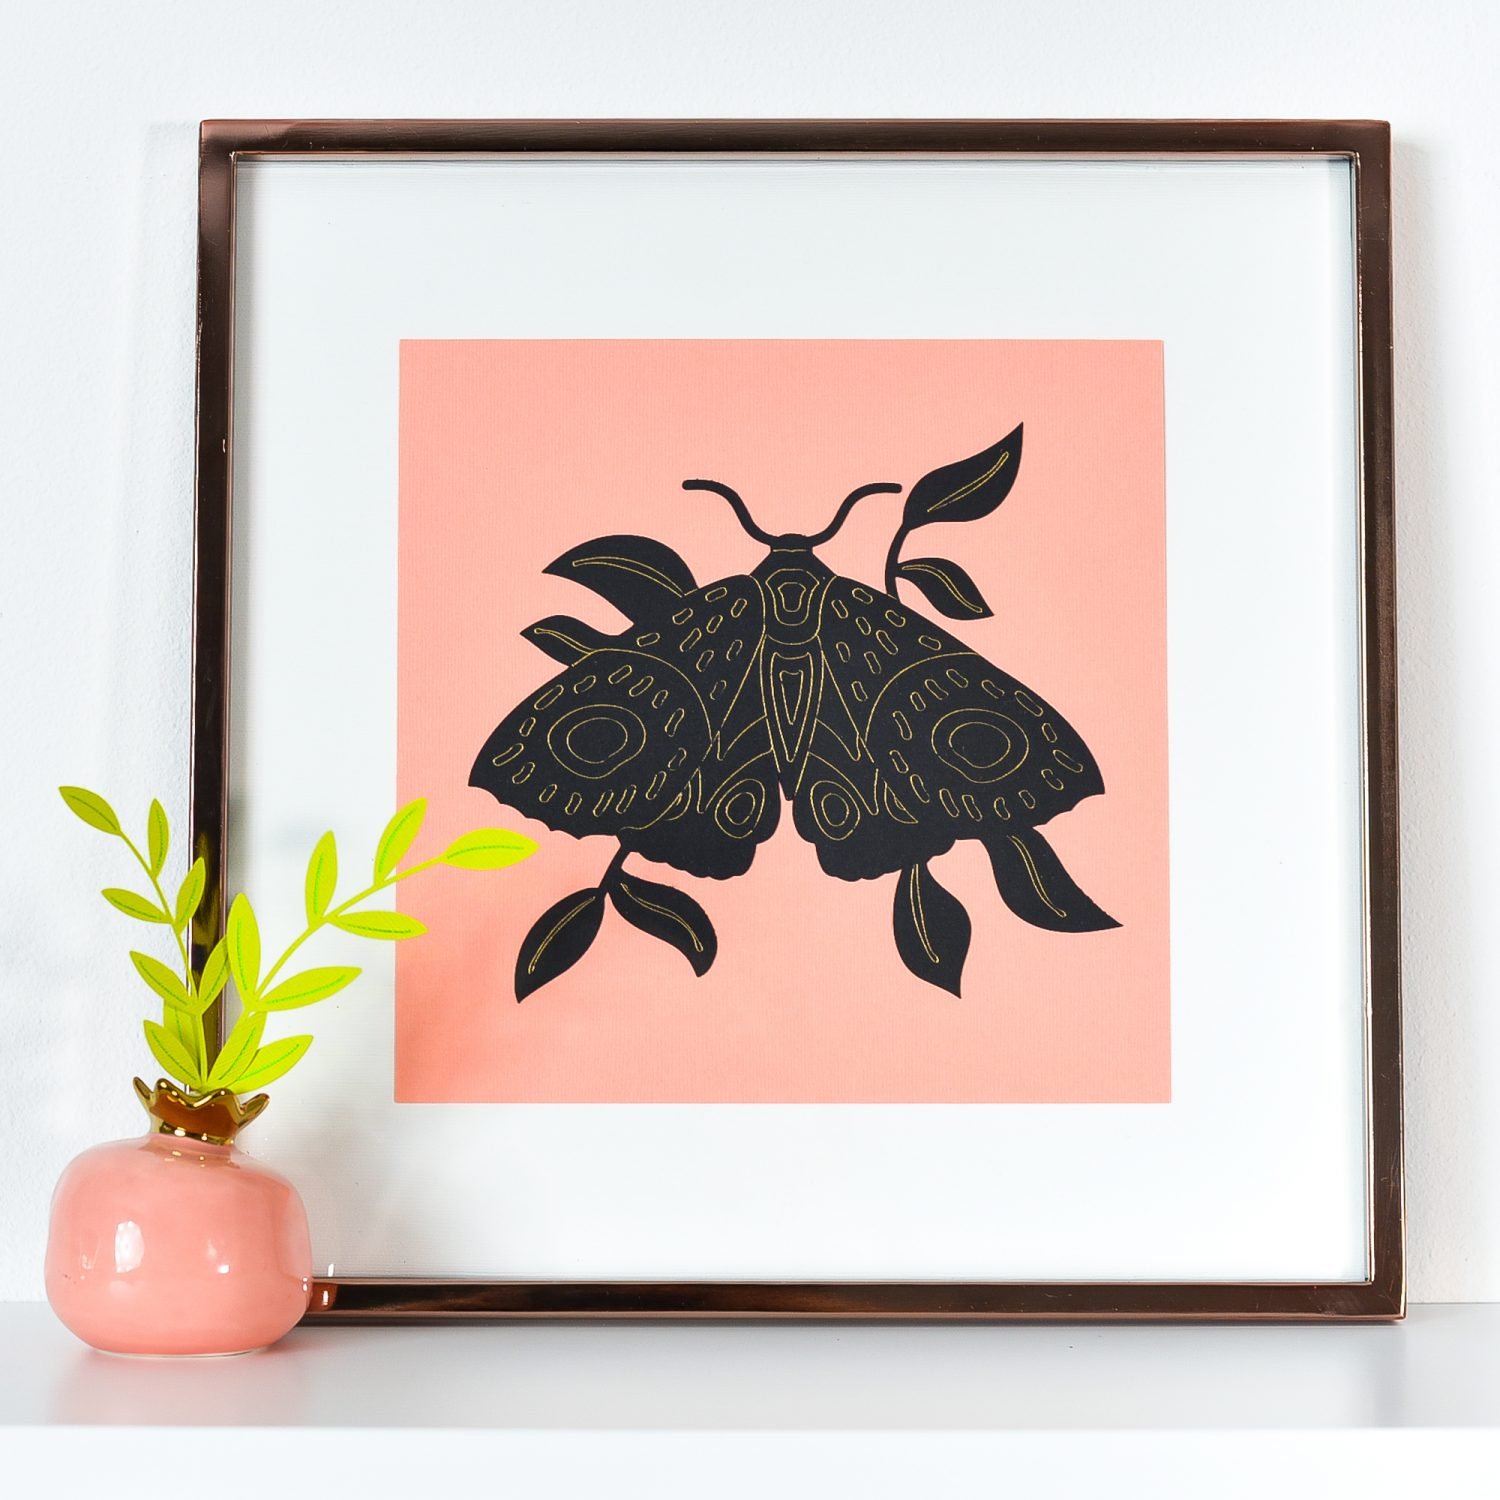 Image of a framed picture of a black butterfly against a pink background with a white mat.  Butterfly is enhanced with gold foil.